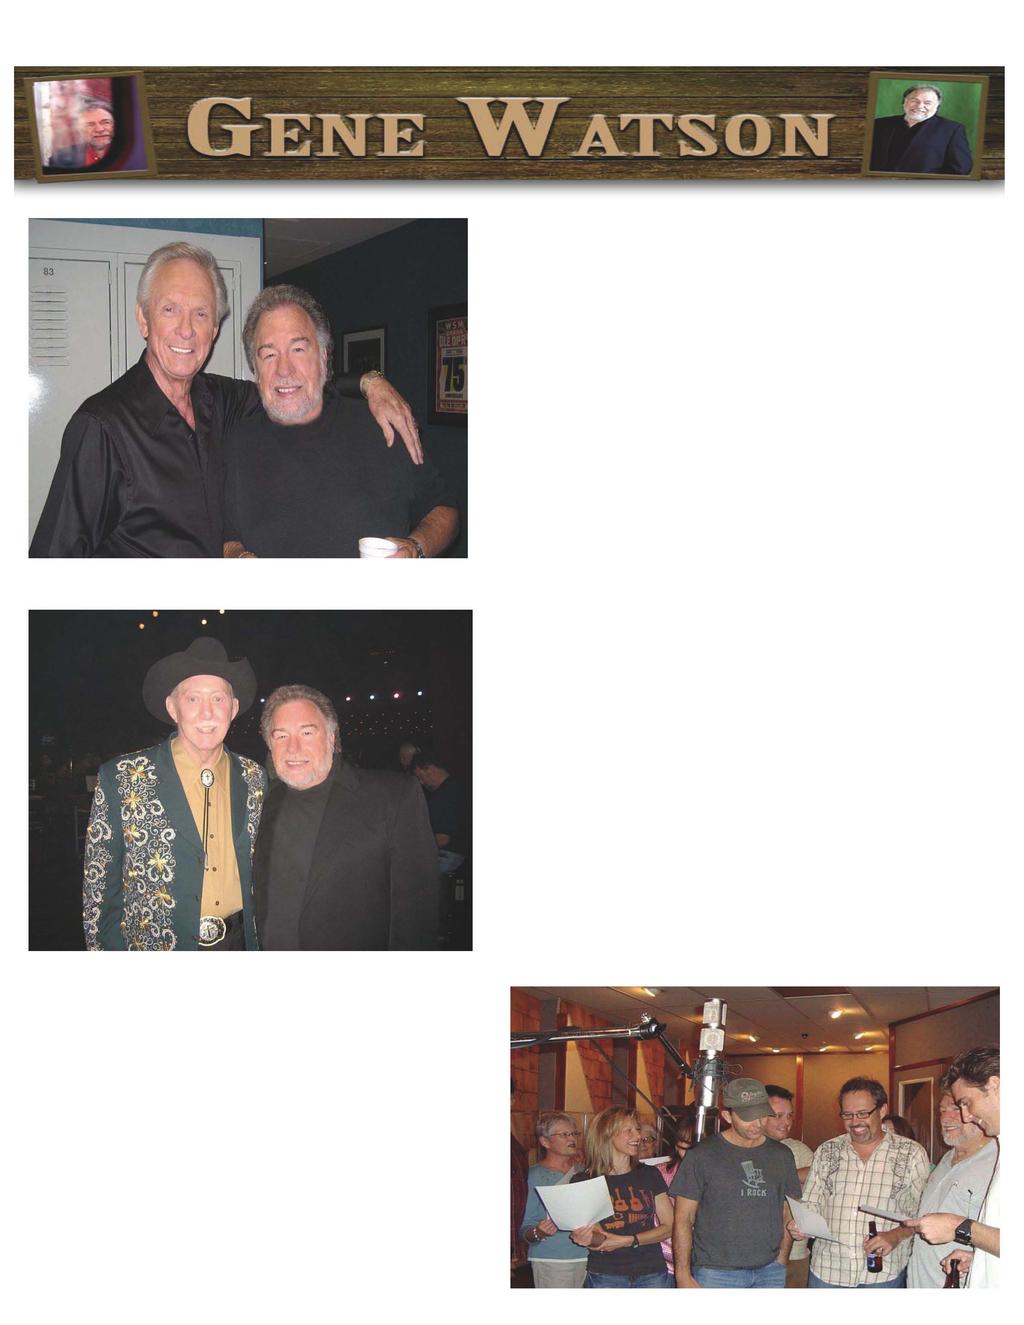 VOLUME 8 June July 2009 '" GENE WATSON - HANGING OUT AT THE OPRY Left: Gene enjoyed visiting backstage at the Grand Ole Opry with the legendary Mel Tillis when both Gene and Mel were there for a